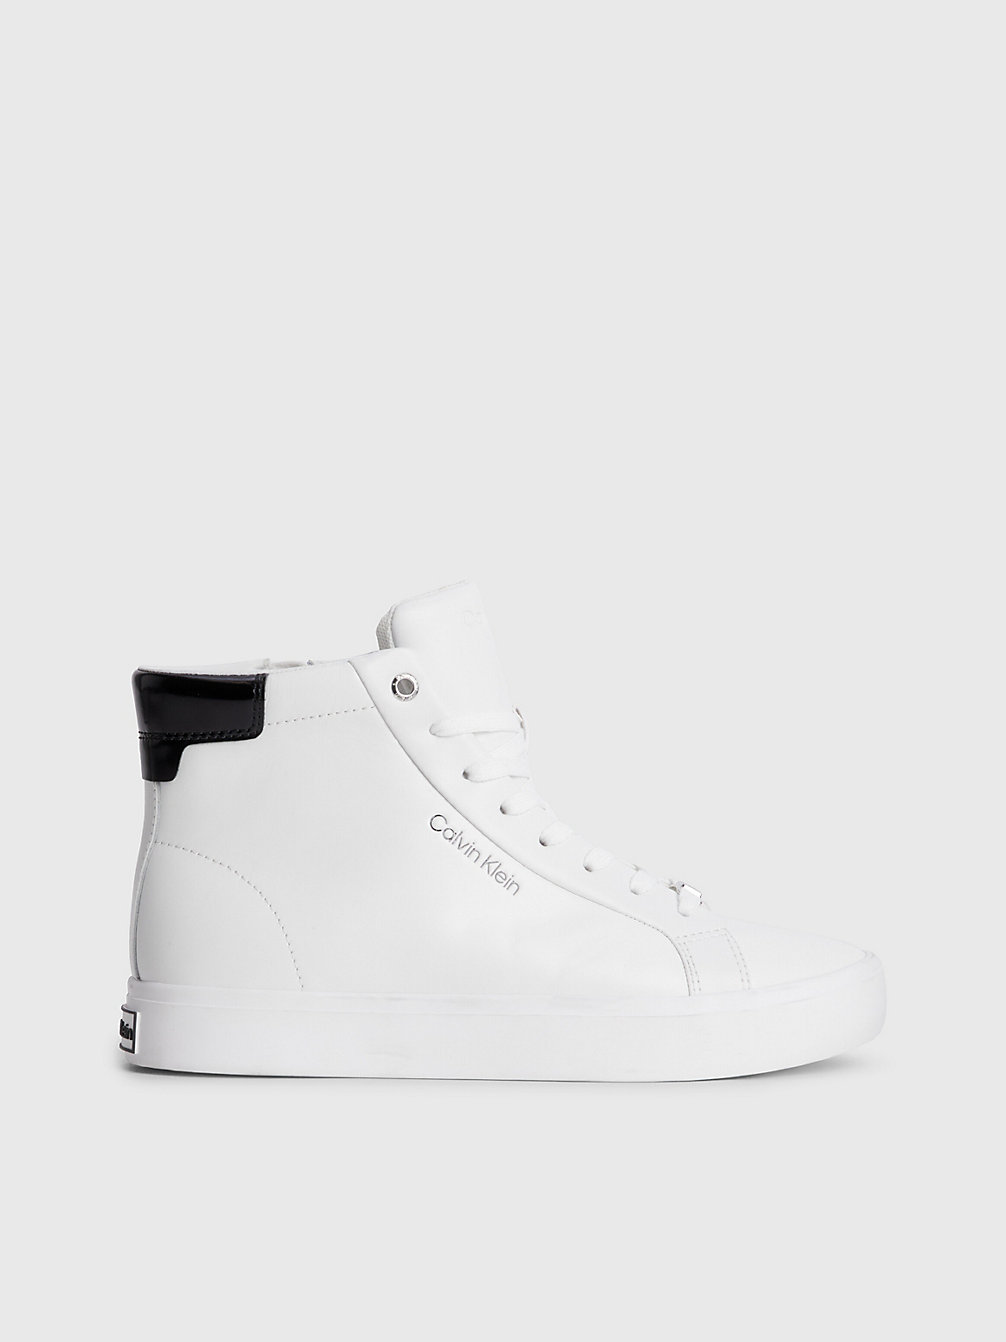 WHITE / BLACK Leather High-Top Trainers undefined women Calvin Klein